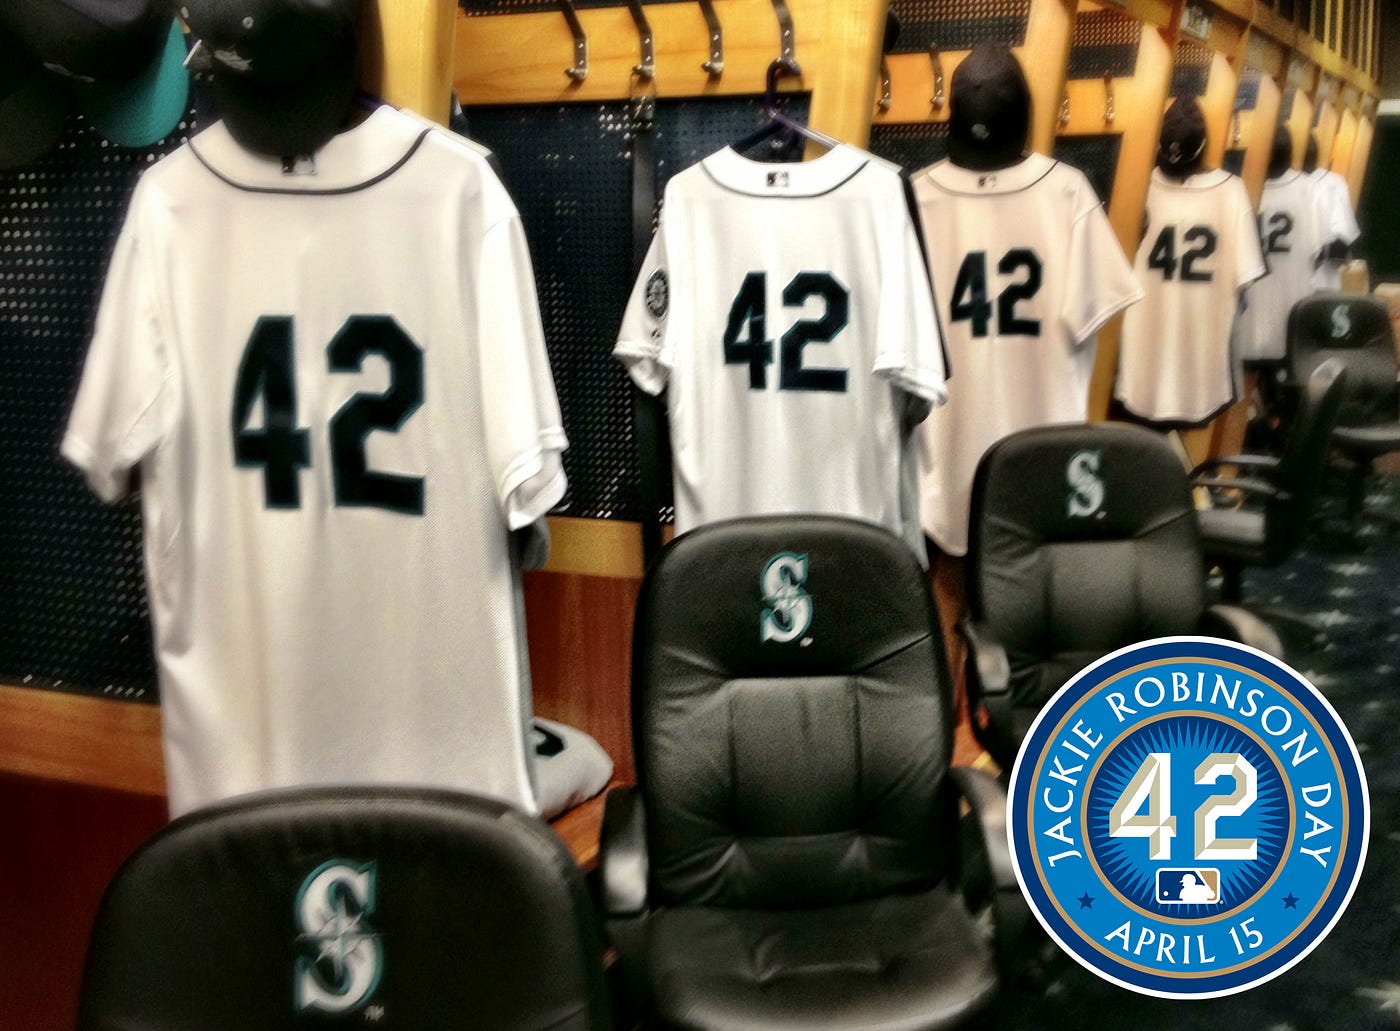 Mariners Celebrate Jackie Robinson Day, by Mariners PR